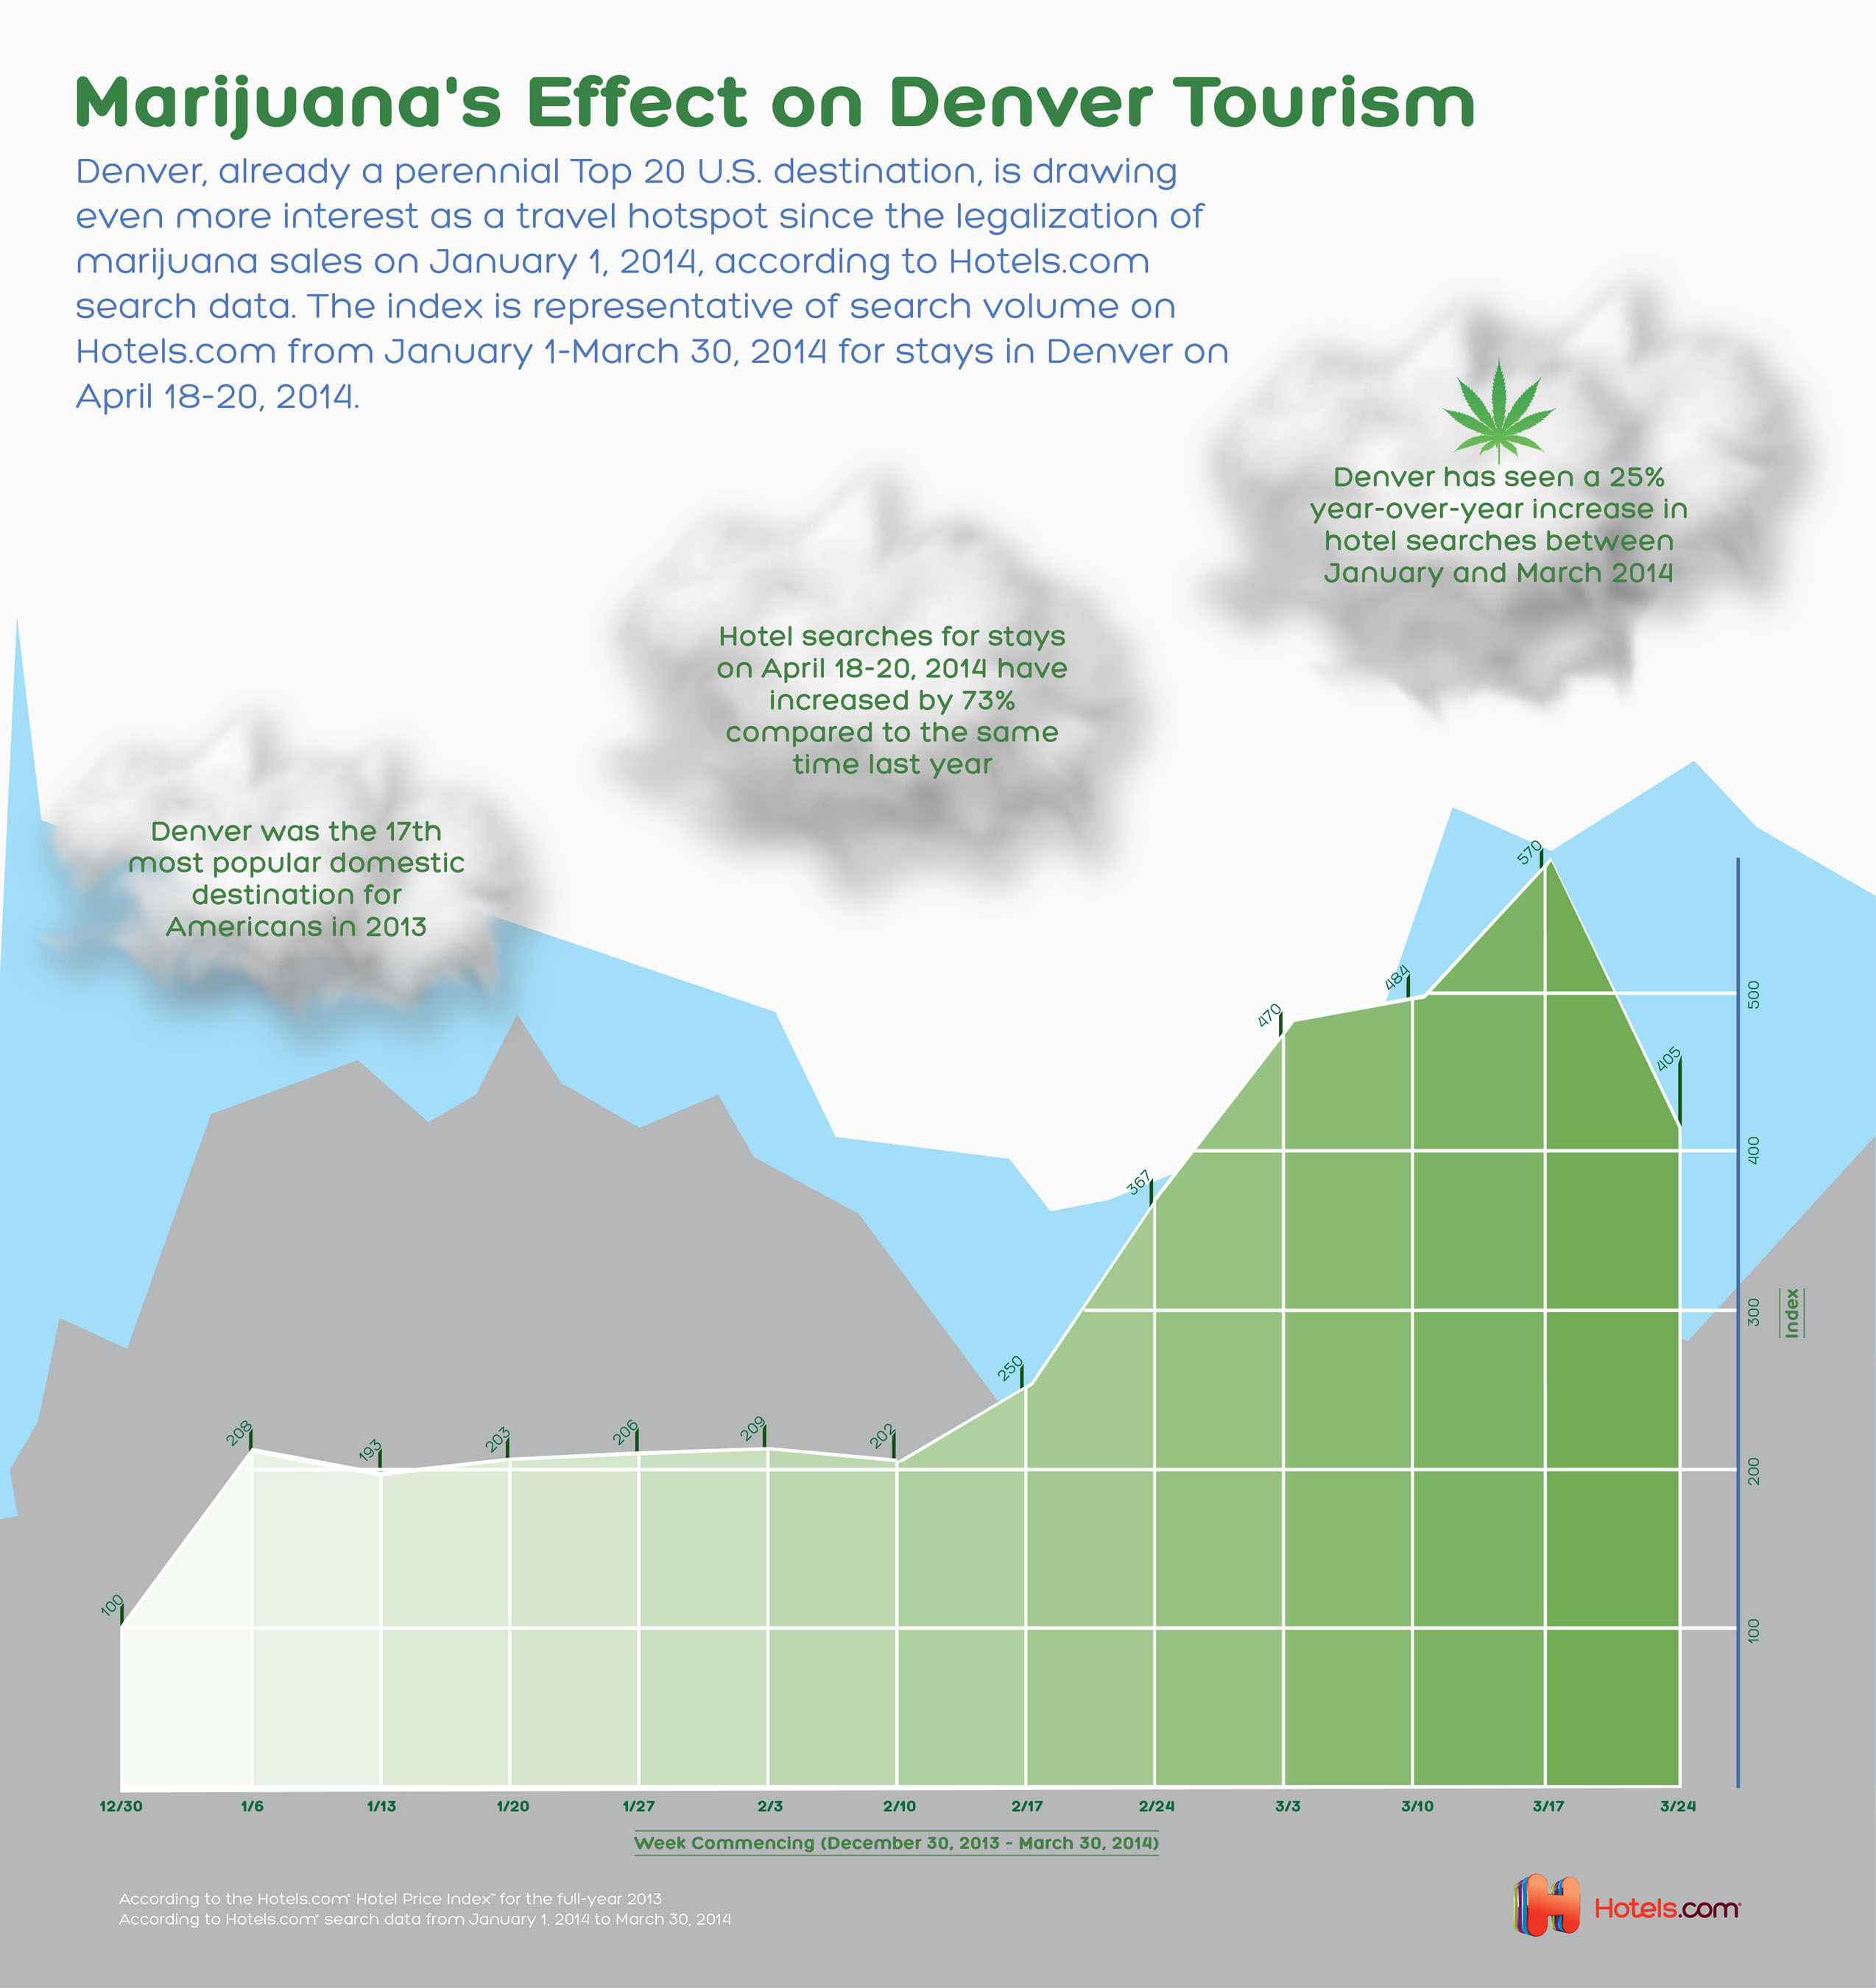 Denver and the state of Colorado have seen a spike in travel interest since the sale of recreational marijuana was legalized to anyone 21 or older at the start of the year, according to search data from Hotels.com(R). (PRNewsFoto/Hotels.com) (PRNewsFoto/HOTELS_COM)